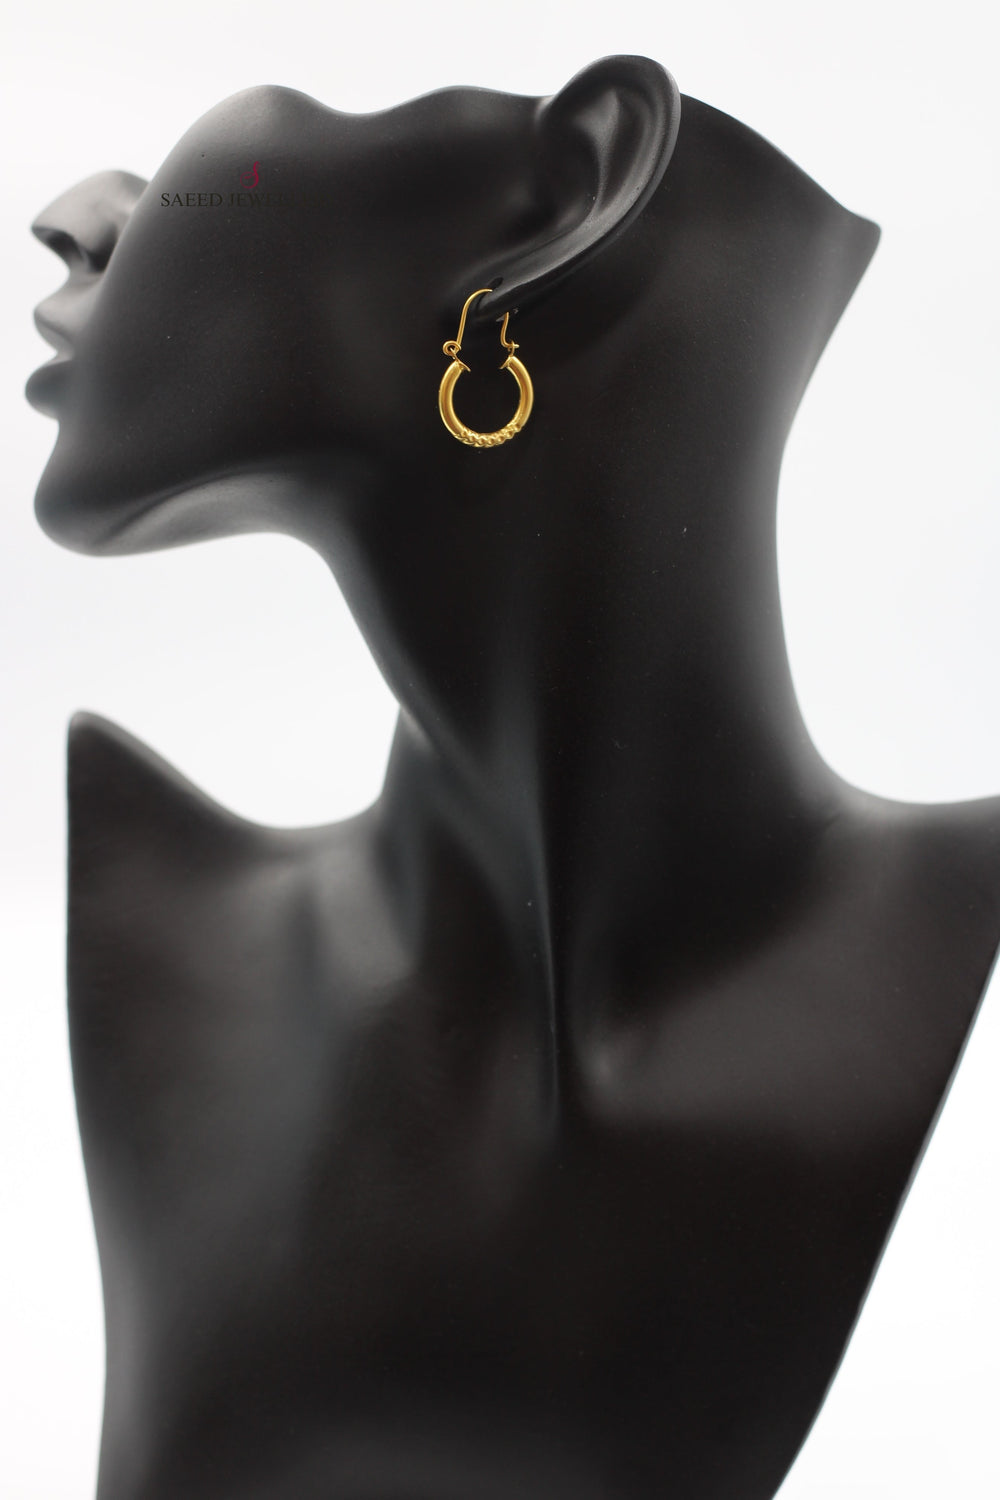 21K Rounded Earrings Made of 21K Yellow Gold by Saeed Jewelry-حلق-ذبلة-8